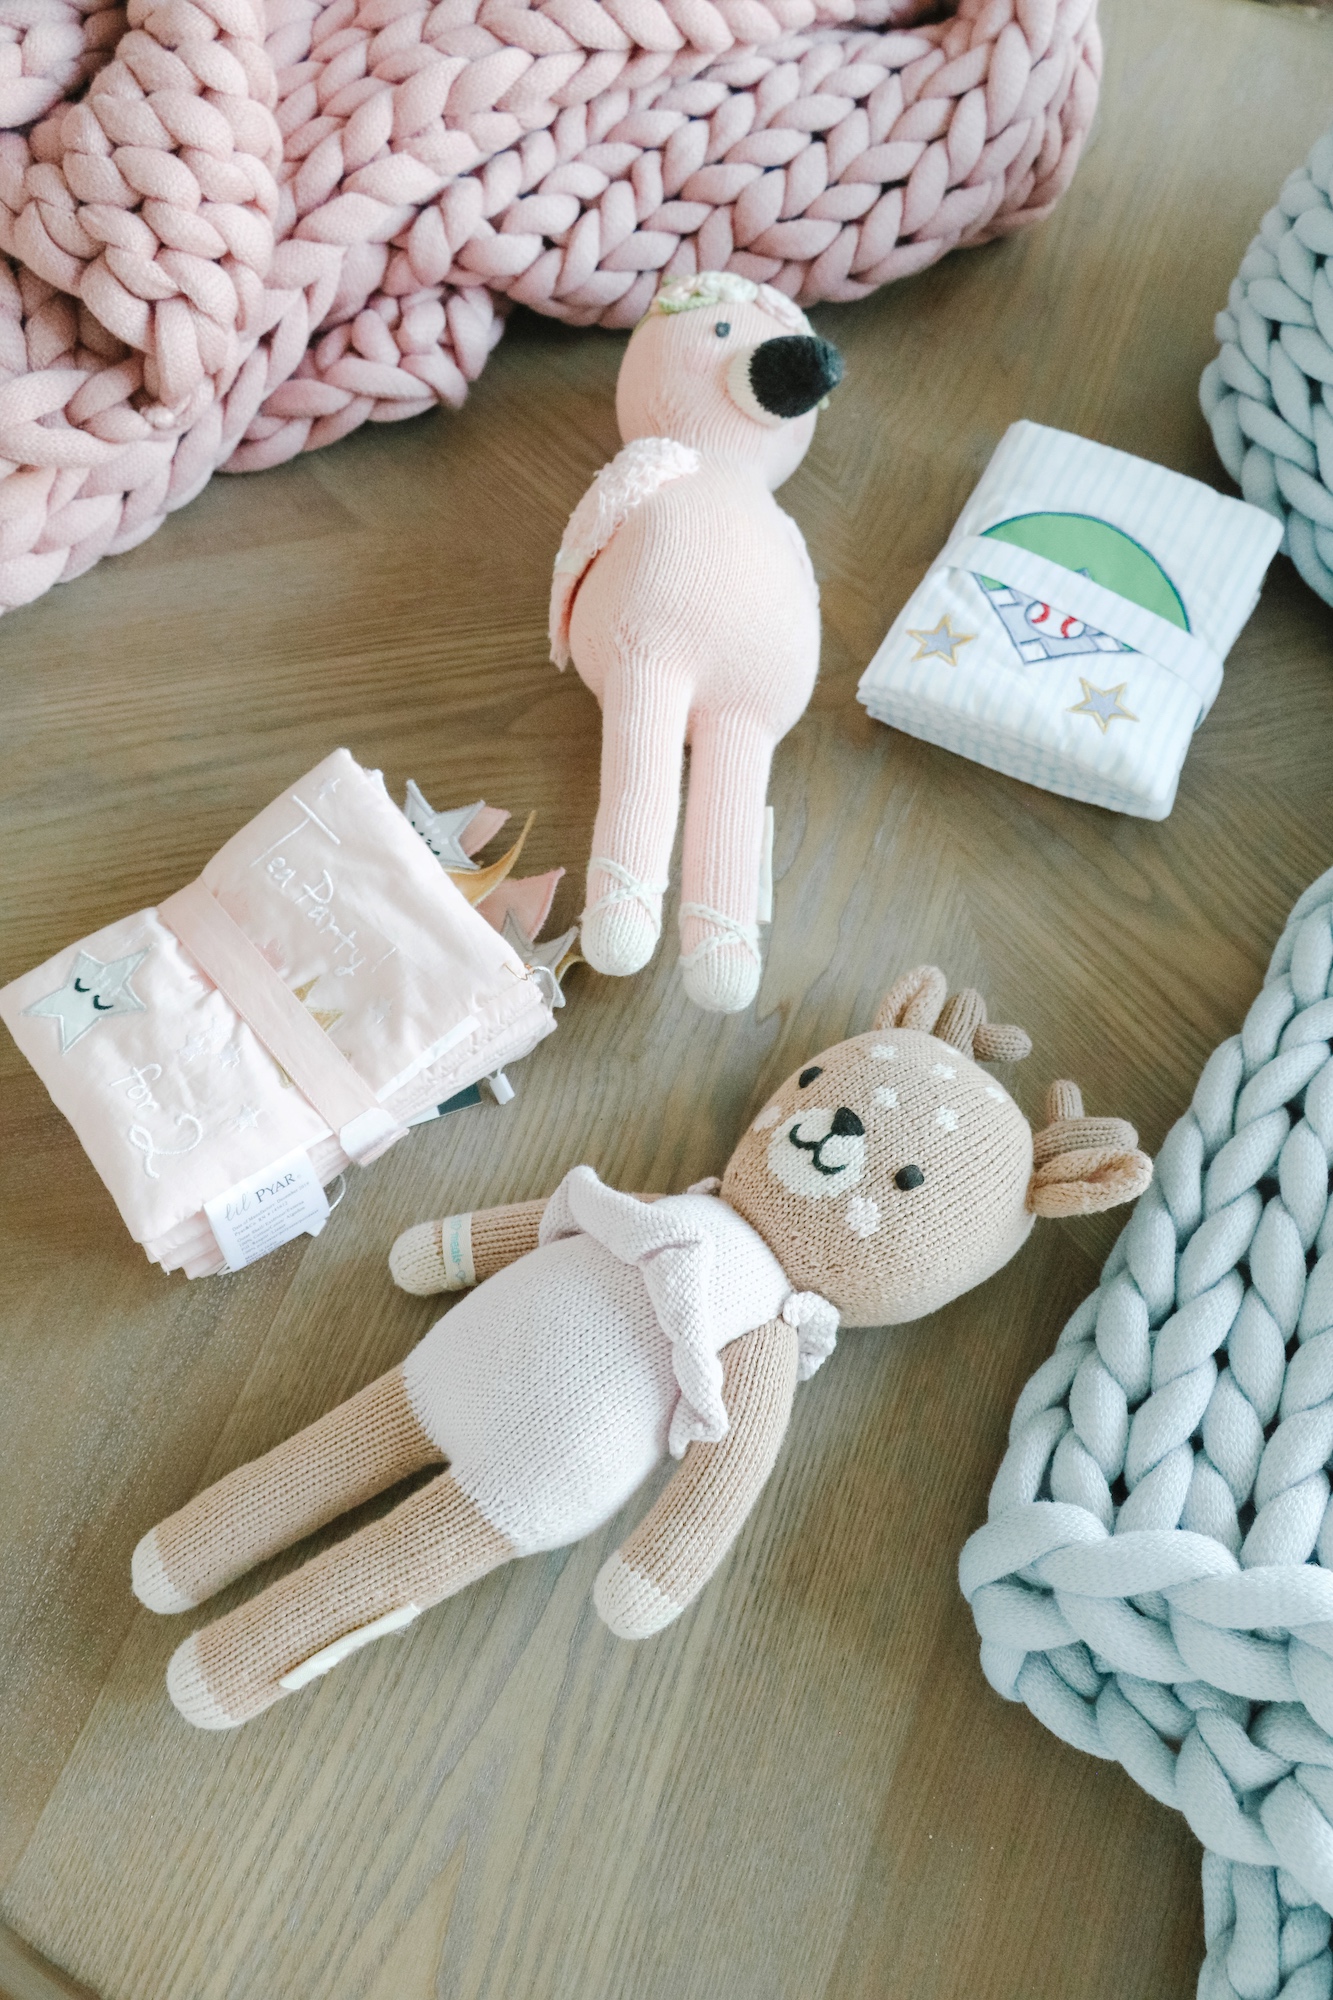 Cuddle and kind toys